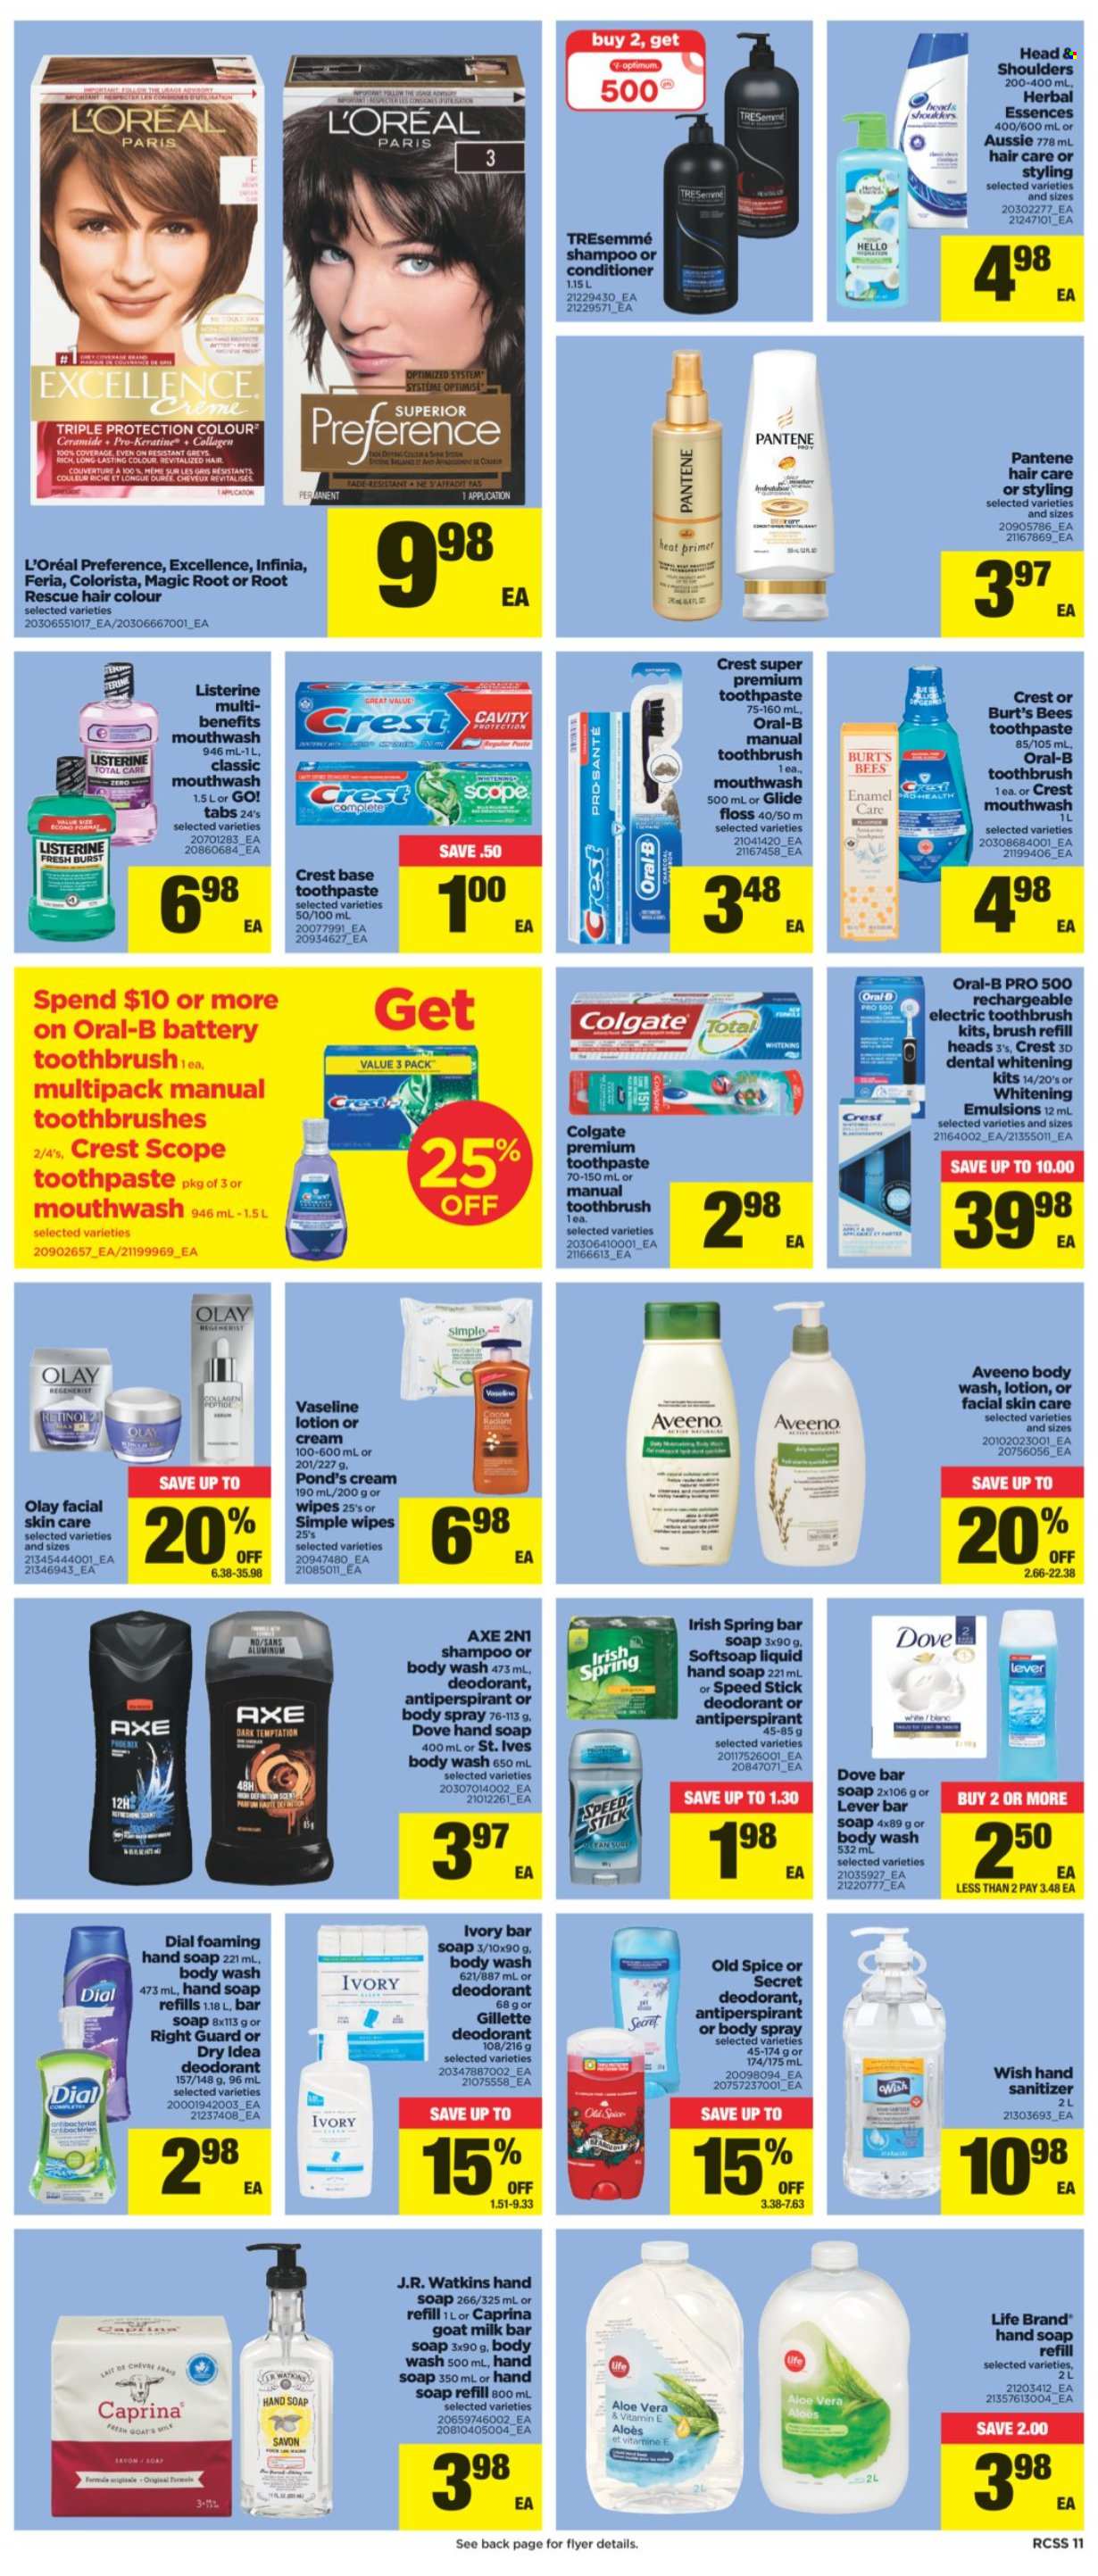 thumbnail - Real Canadian Superstore Flyer - October 21, 2021 - October 27, 2021 - Sales products - goat milk, spice, L'Or, wipes, Aveeno, body wash, Softsoap, hand soap, Vaseline, soap bar, POND'S, Dial, soap, toothbrush, toothpaste, mouthwash, Crest, L’Oréal, Olay, Aussie, conditioner, TRESemmé, hair color, body lotion, body spray, anti-perspirant, Speed Stick, hand sanitizer, Optimum, electric toothbrush, Go!, Dove, Colgate, Gillette, Listerine, shampoo, Head & Shoulders, Pantene, Old Spice, Oral-B, deodorant. Page 11.